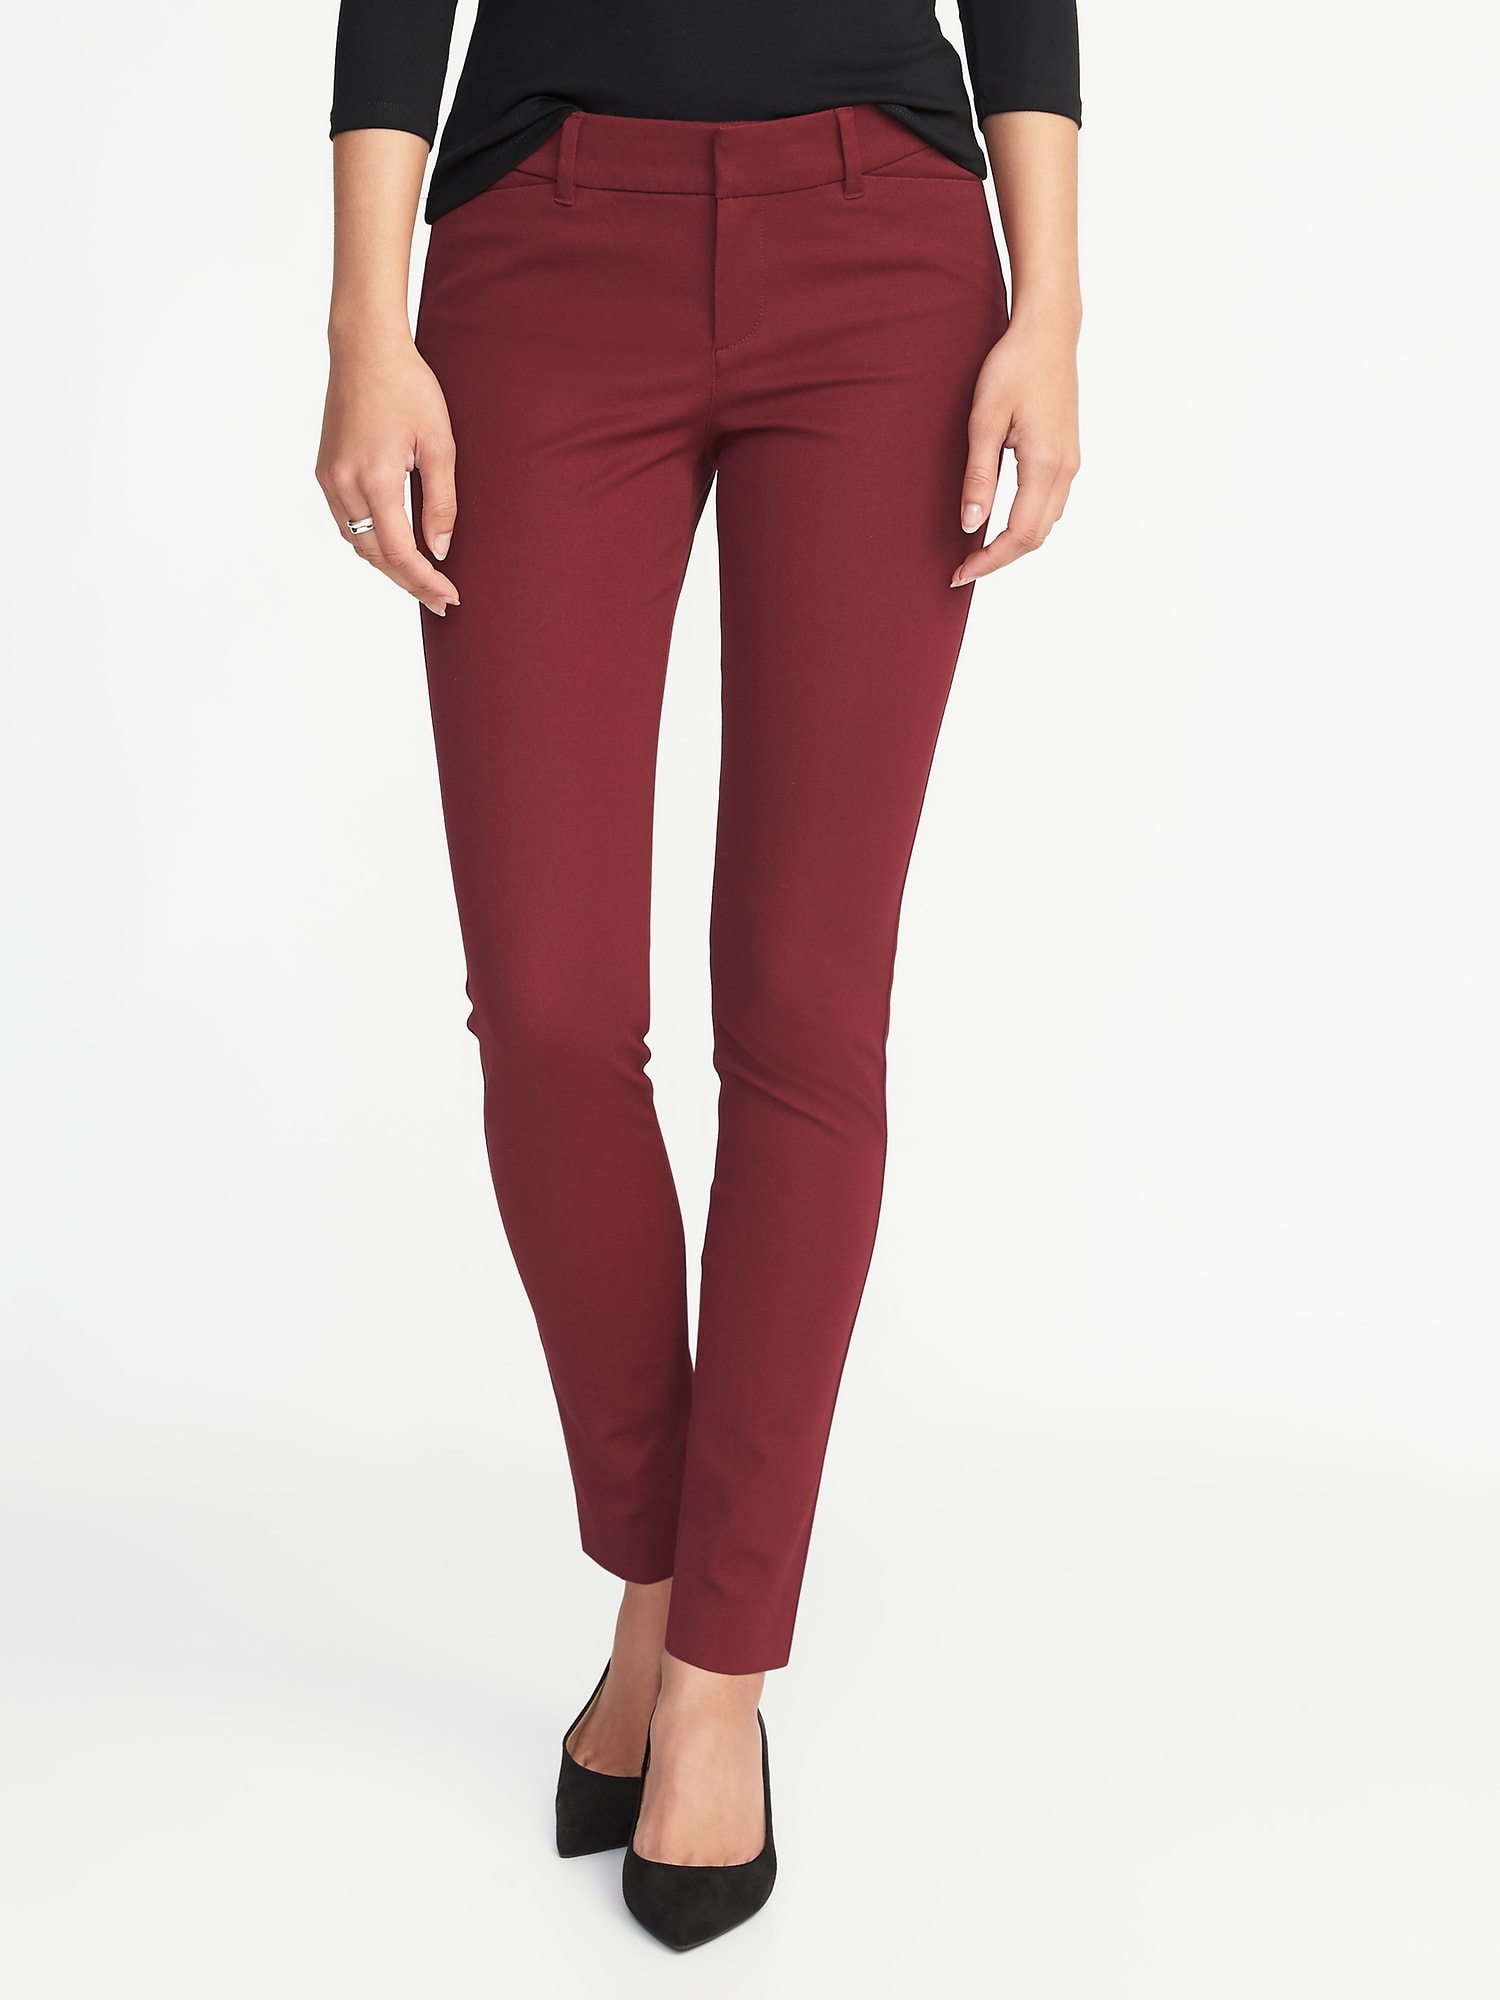 Mid-Rise Pixie Skinny Pants for Women